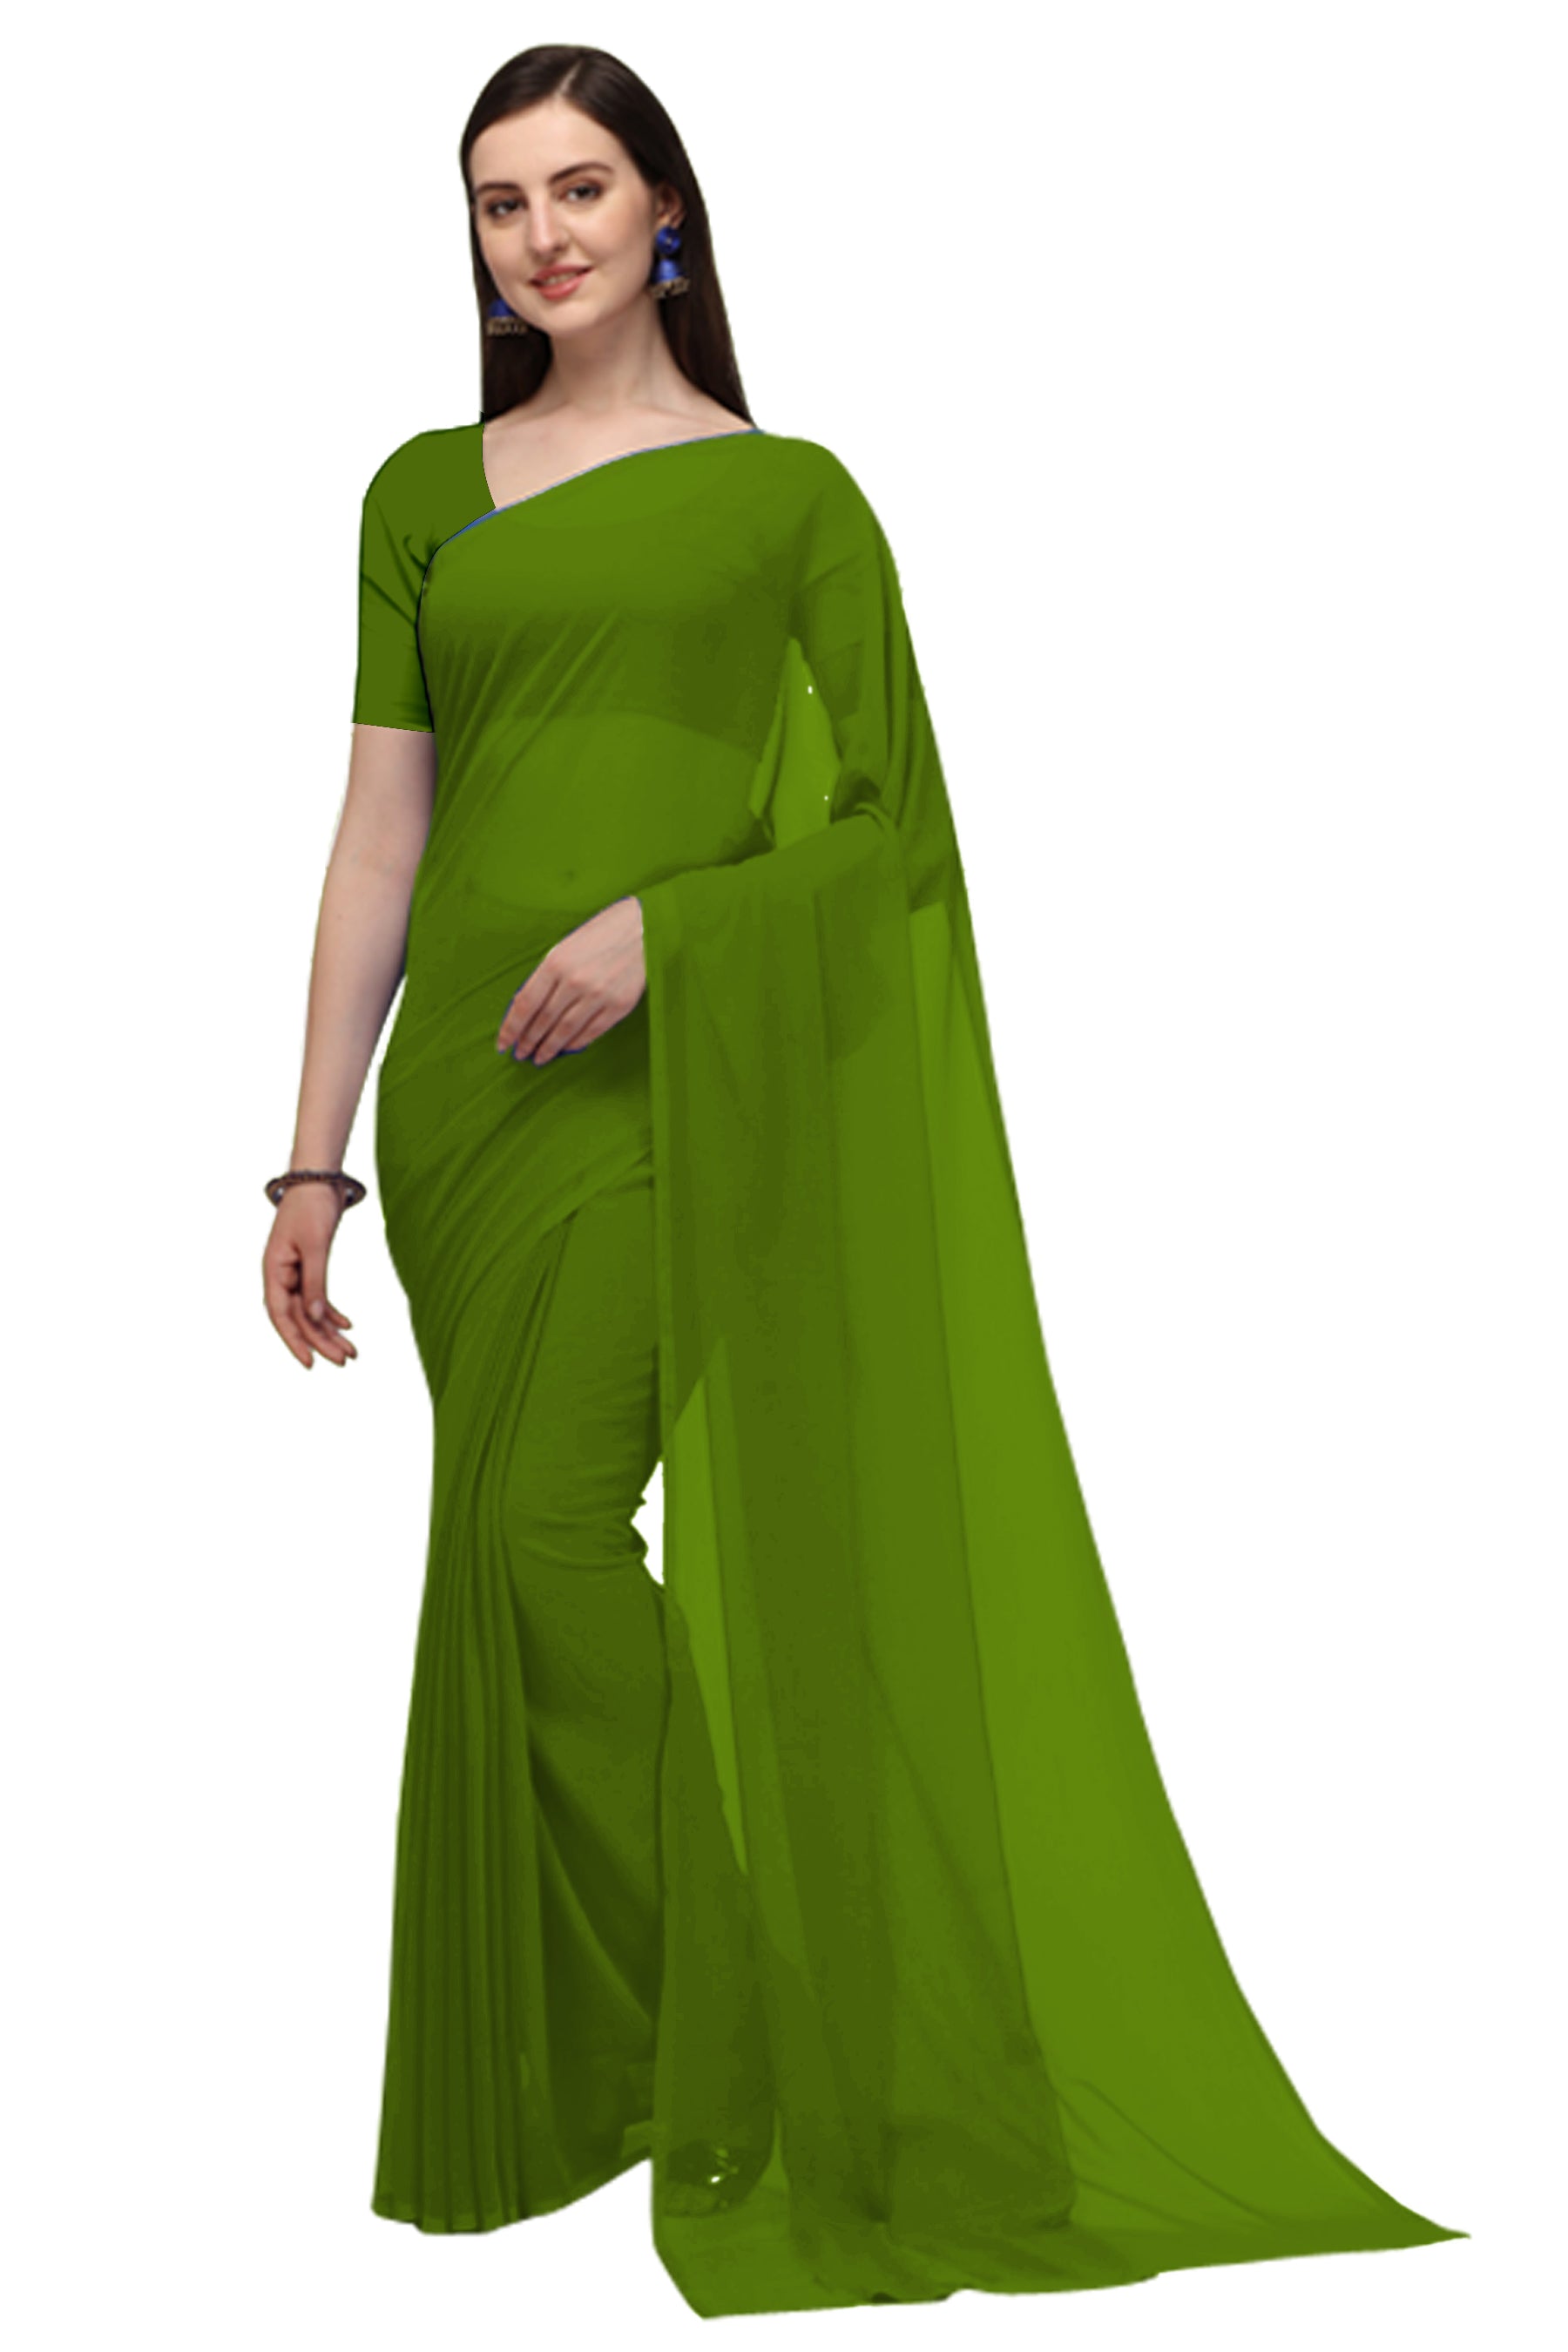 Women's Plain Woven Daily Wear  Formal Georgette Sari With Blouse Piece (Mehandi Green) - NIMIDHYA